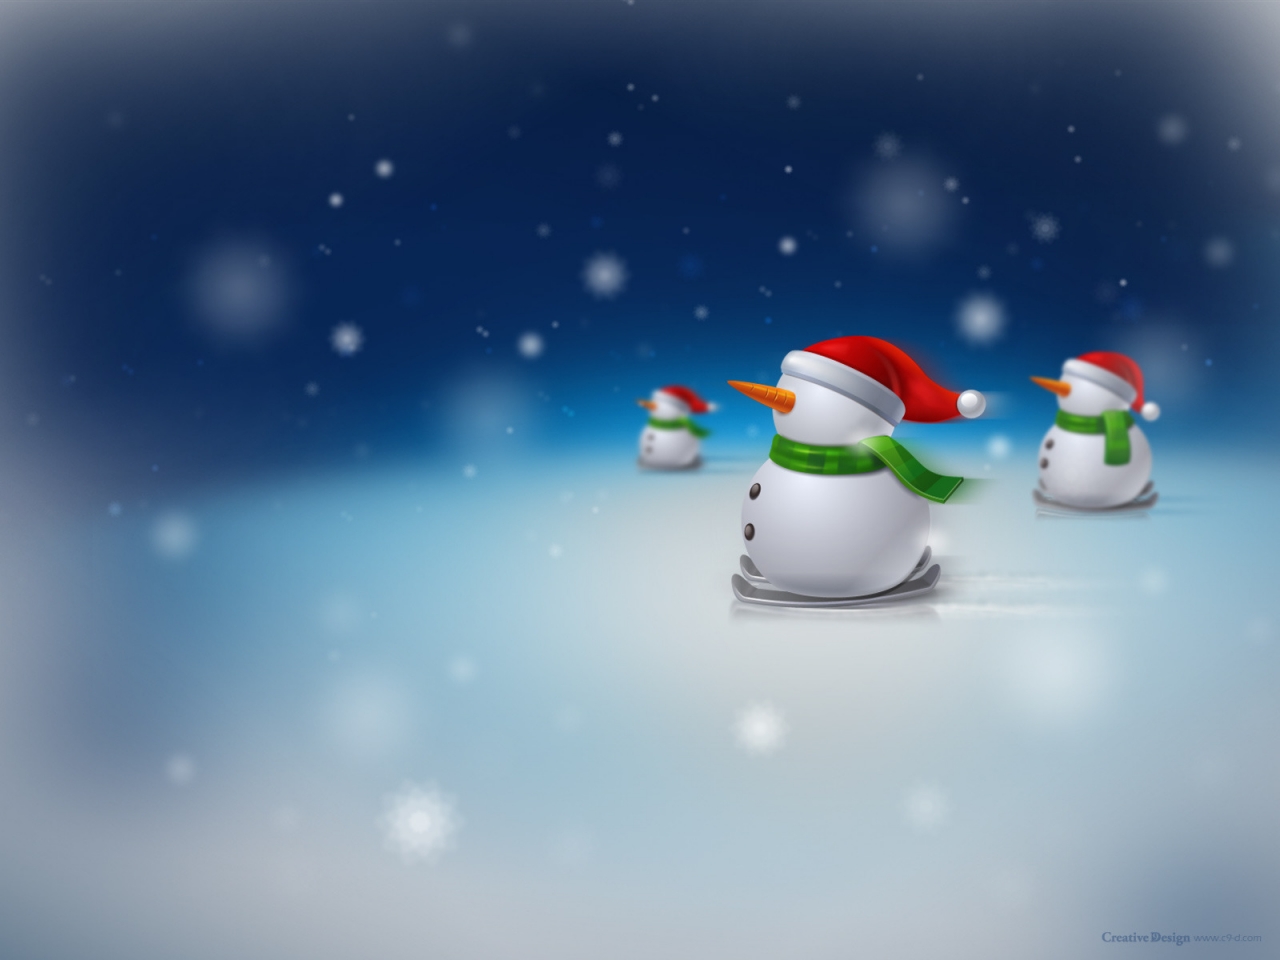 Snowman for 1280 x 960 resolution